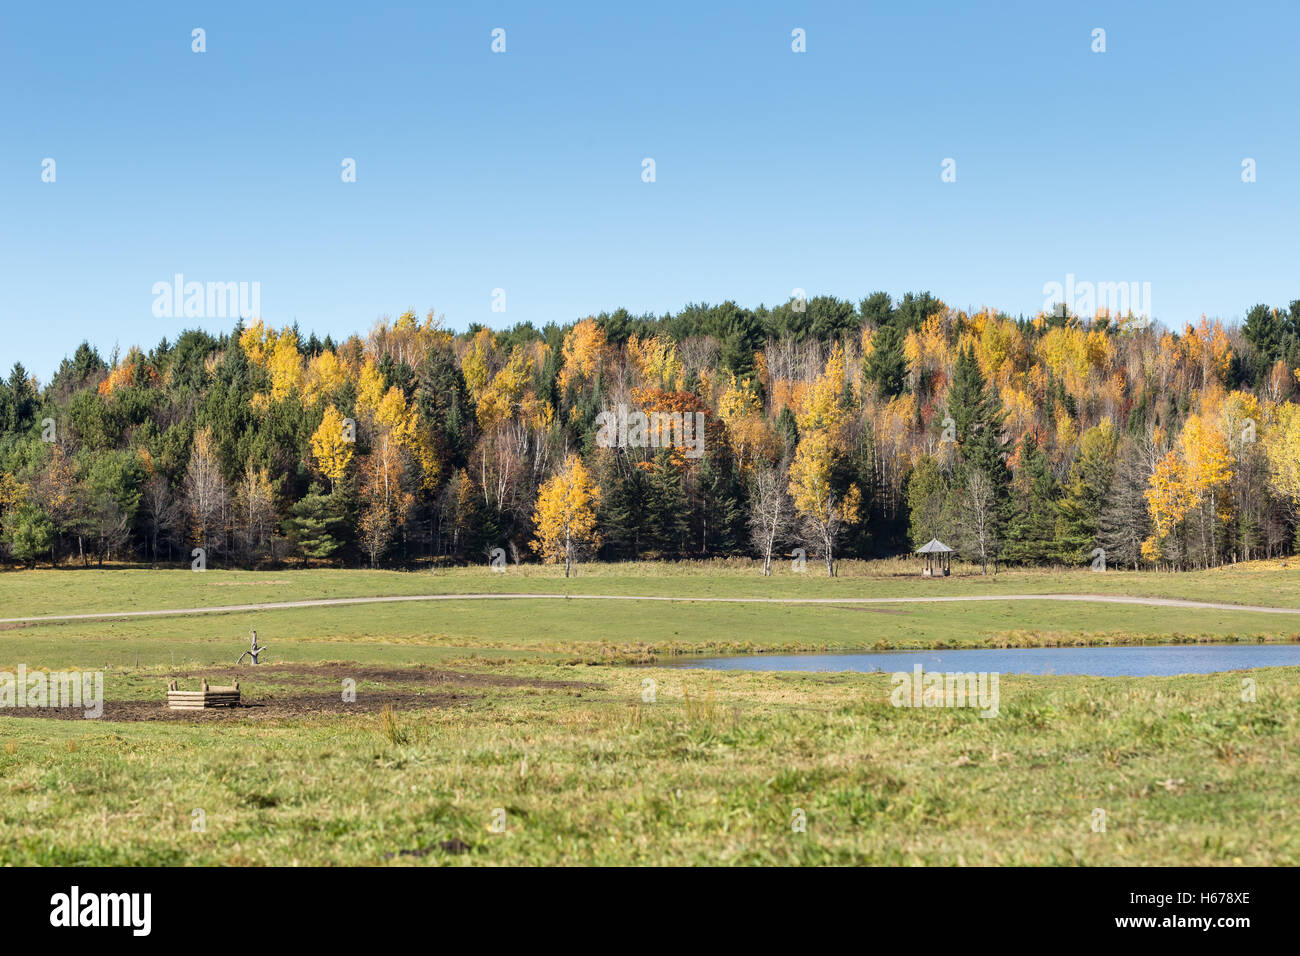 A forest landscape in the fall season Stock Photo